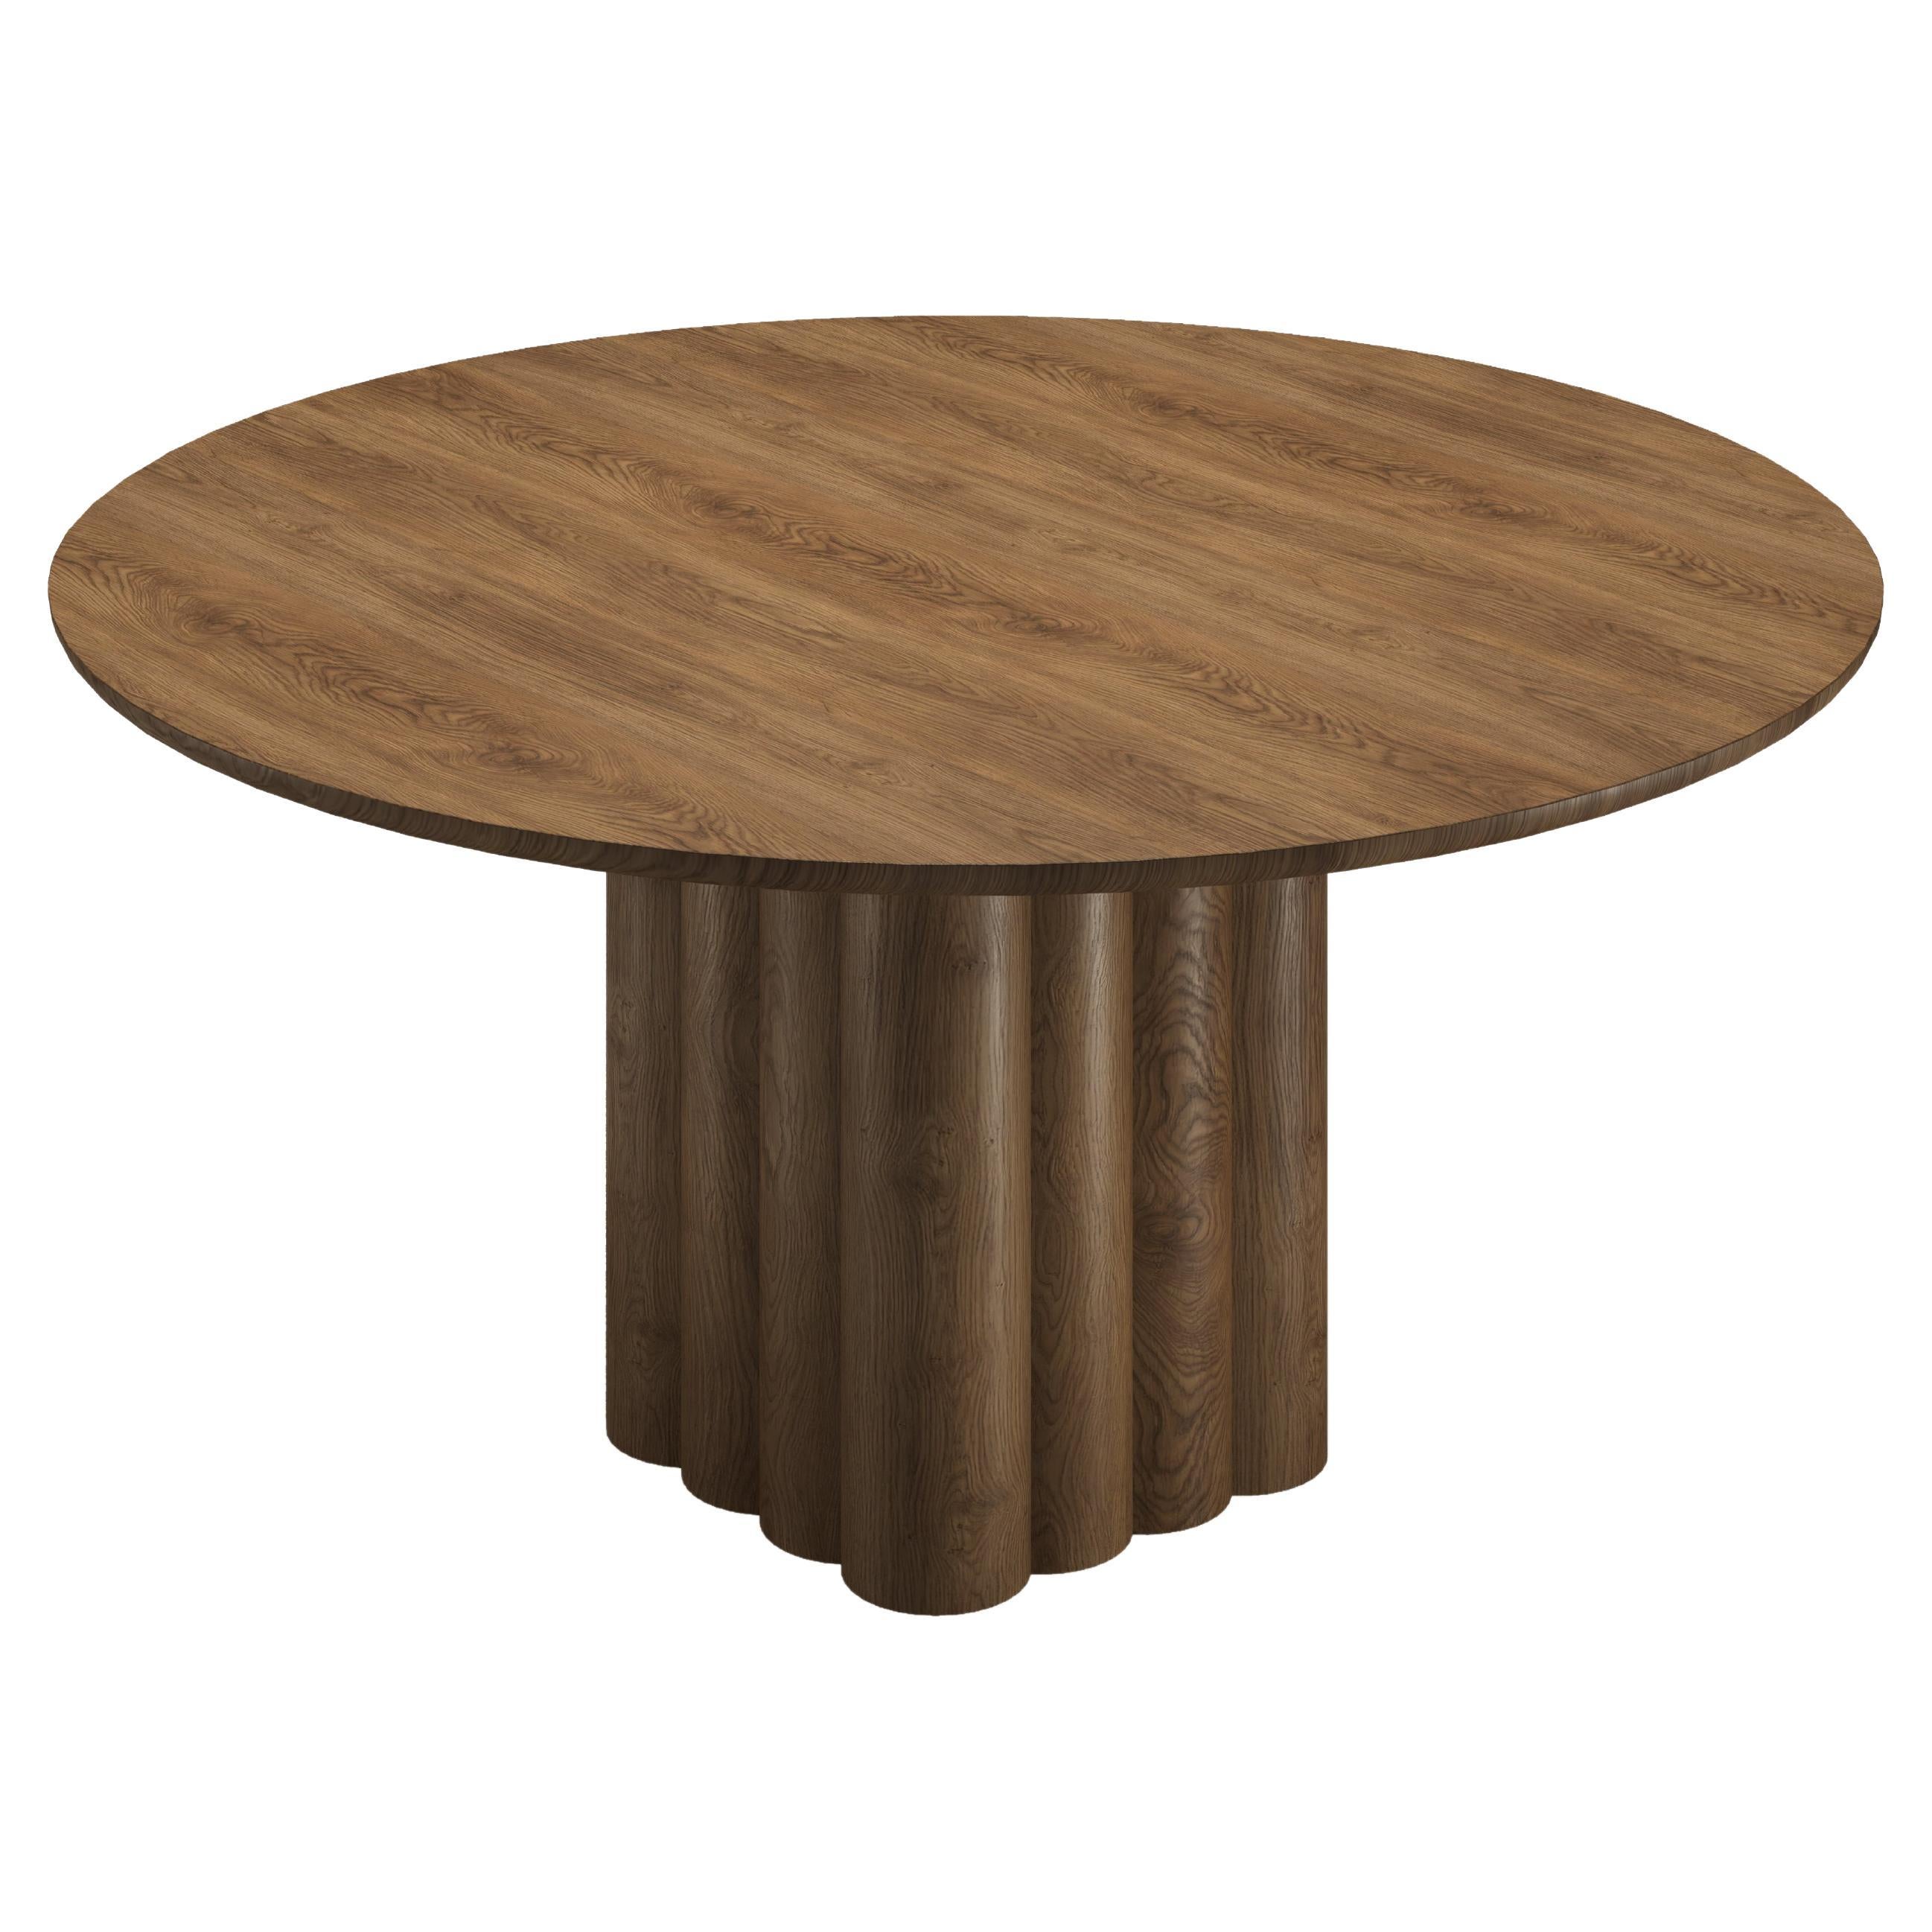 Round Dining Table 'Plush' by Dk3, Smoked Oak or Walnut, 160 cm For Sale